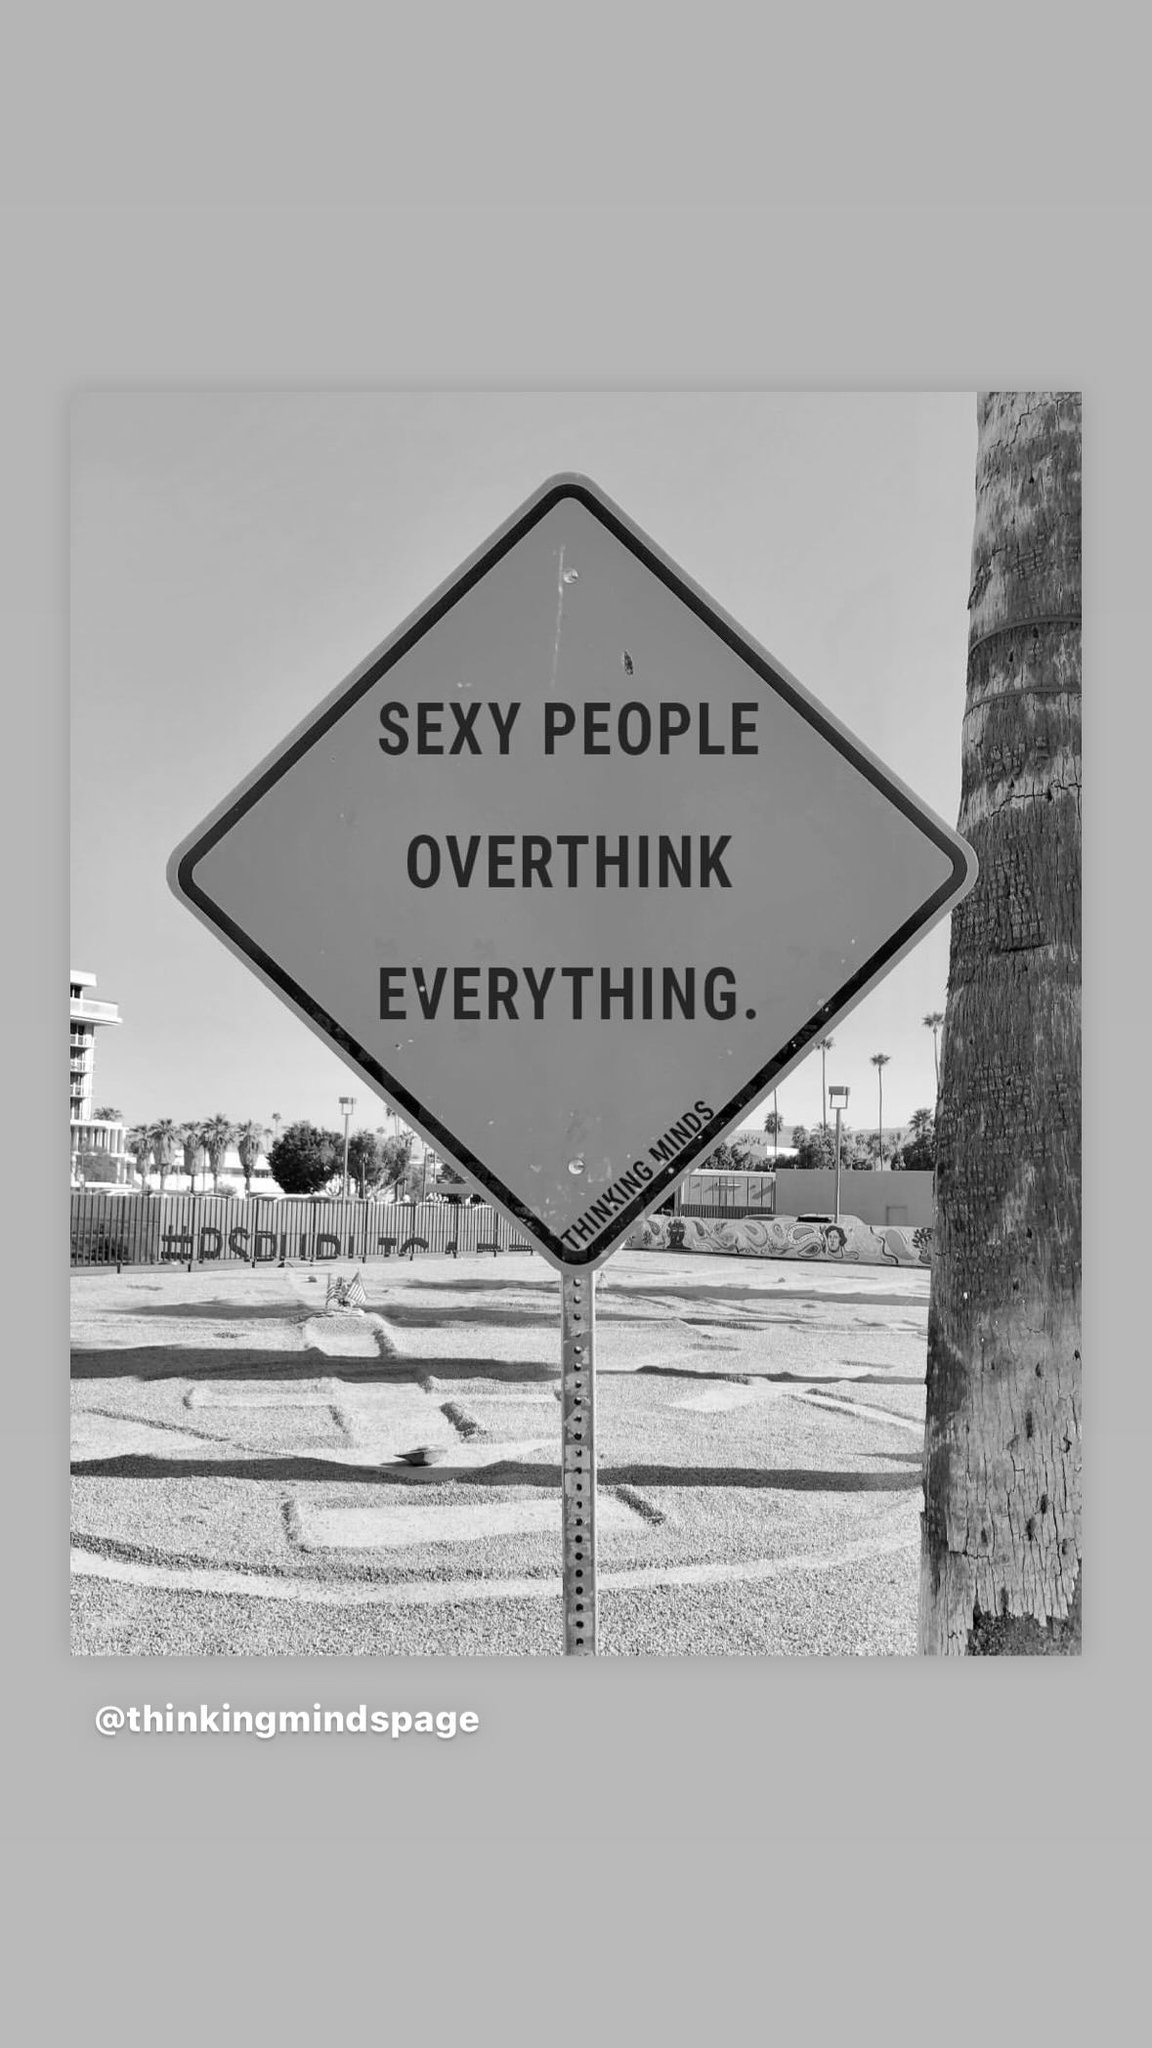 The post featured a black and white photo of a caution sign with text that read: 'Sexy people overthink everything'